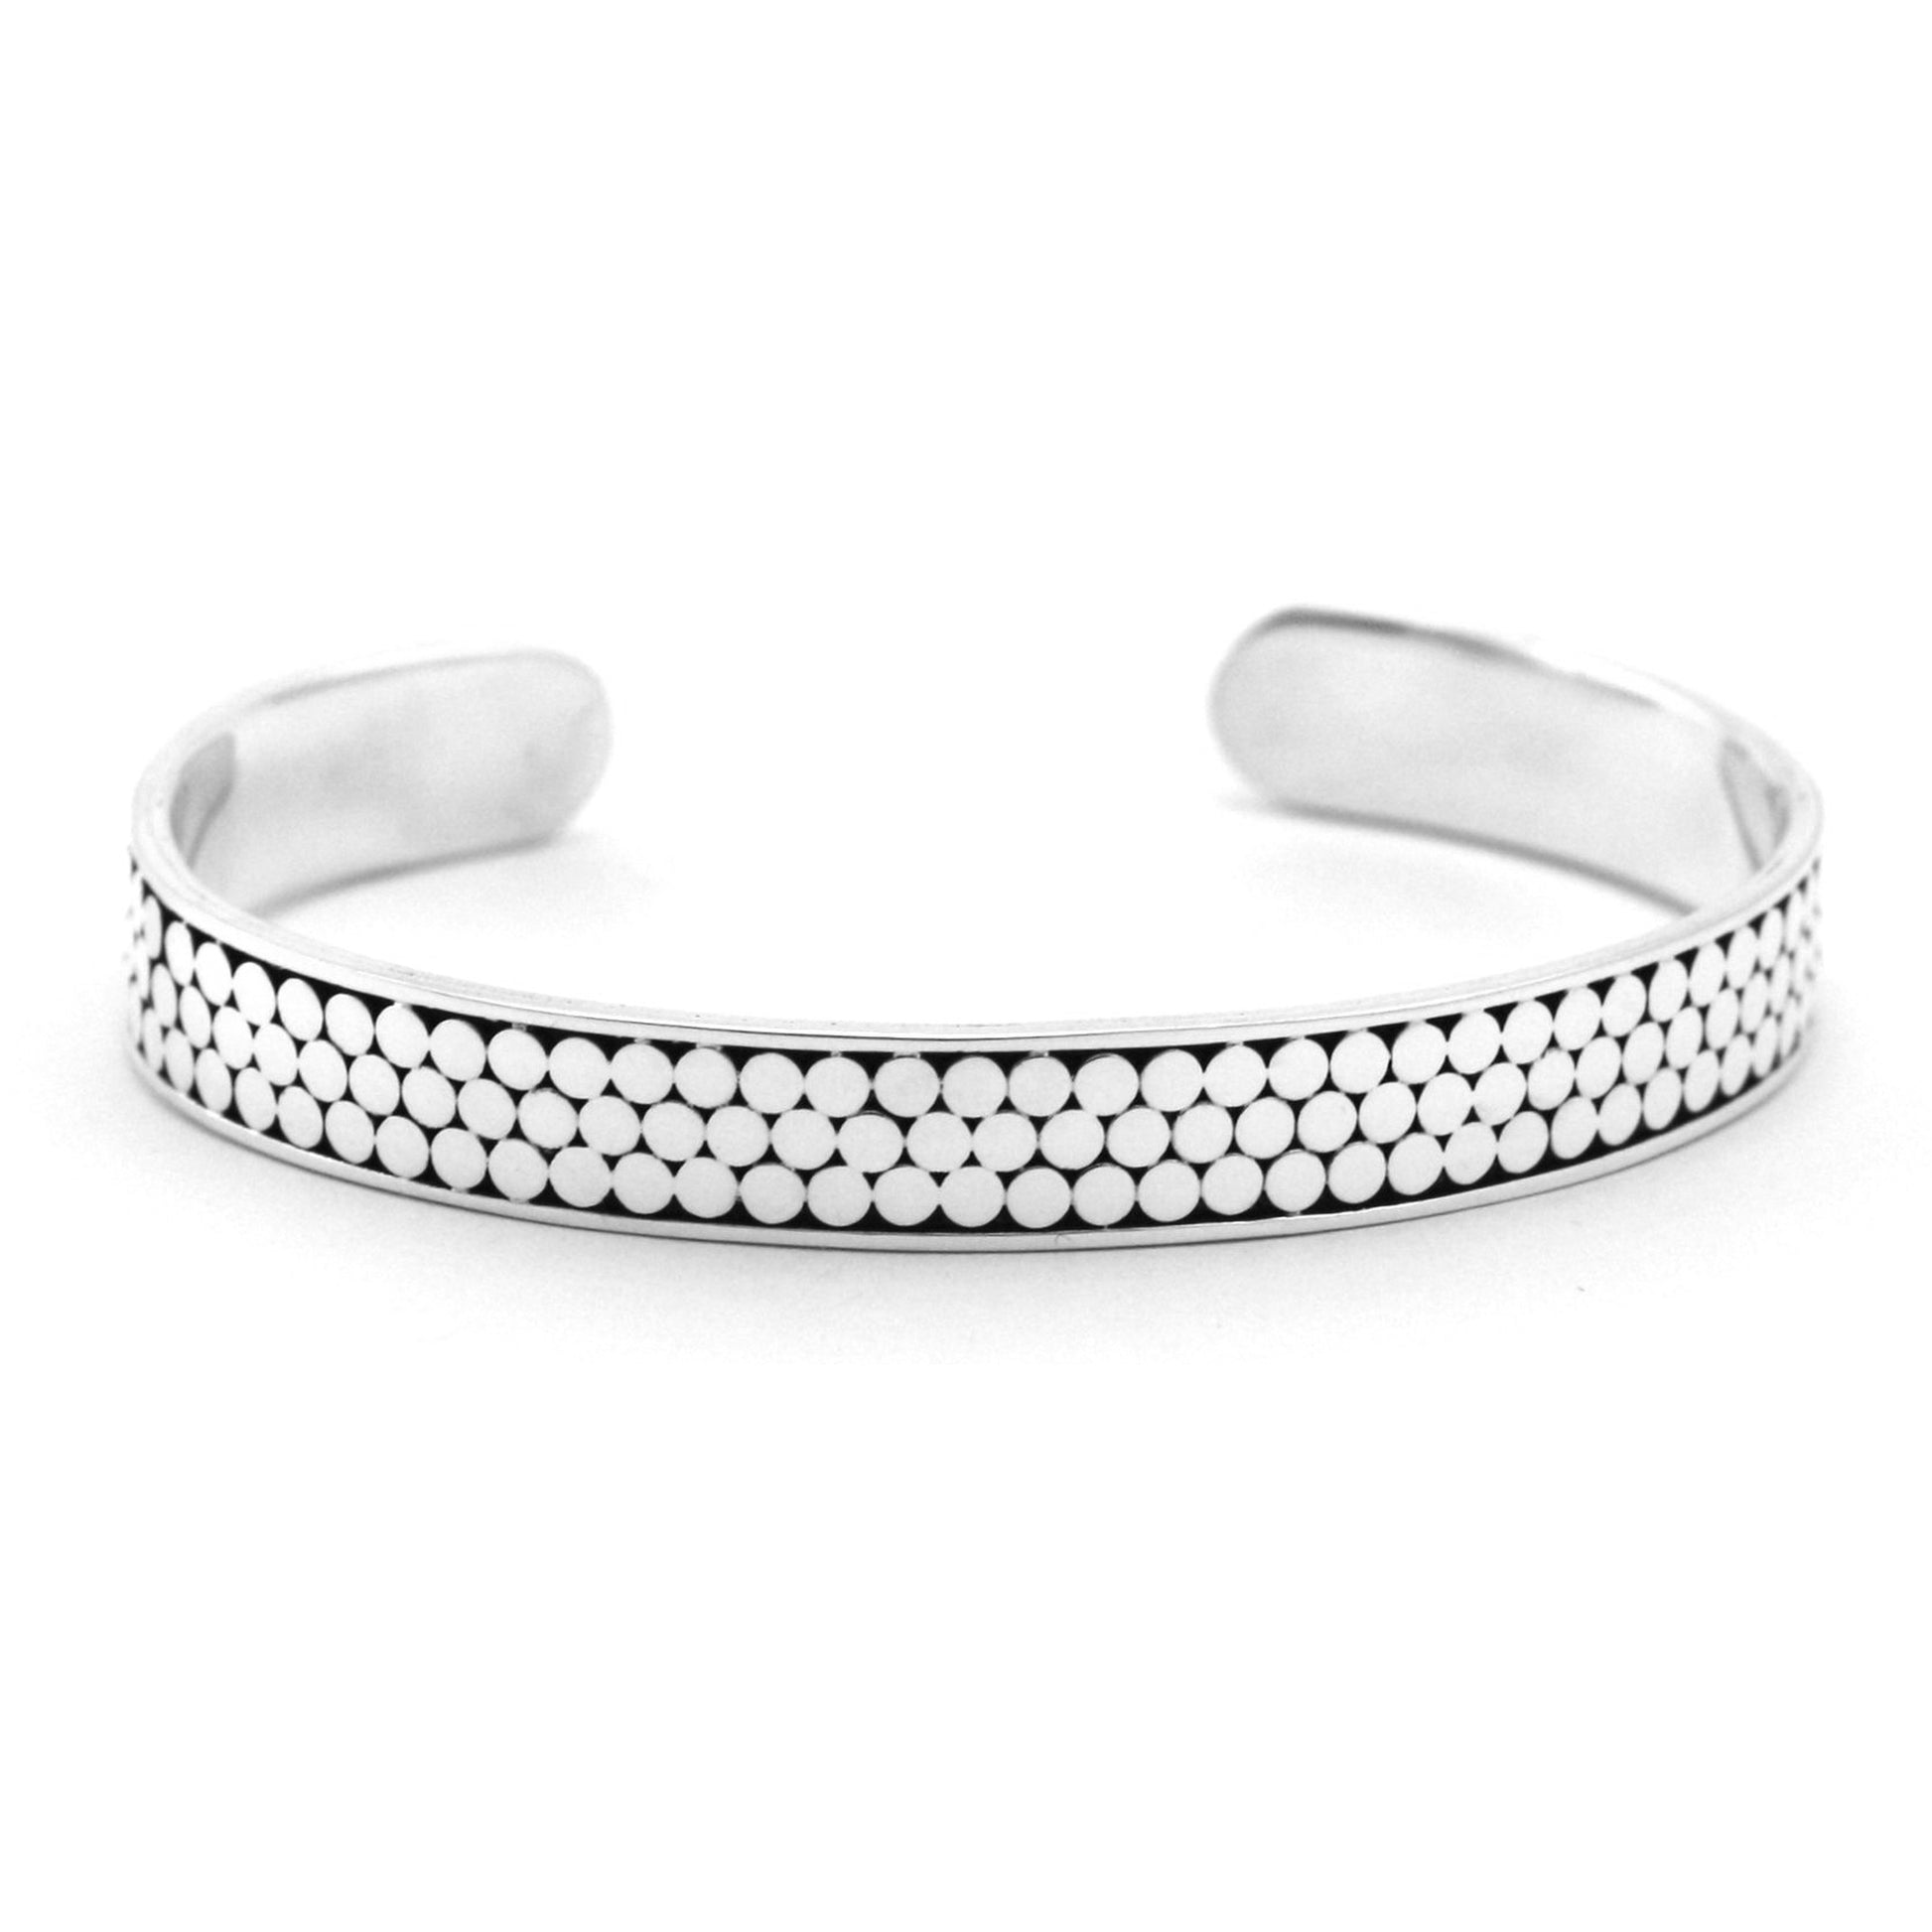 Silver cuff bracelet with three rows of flat dots.